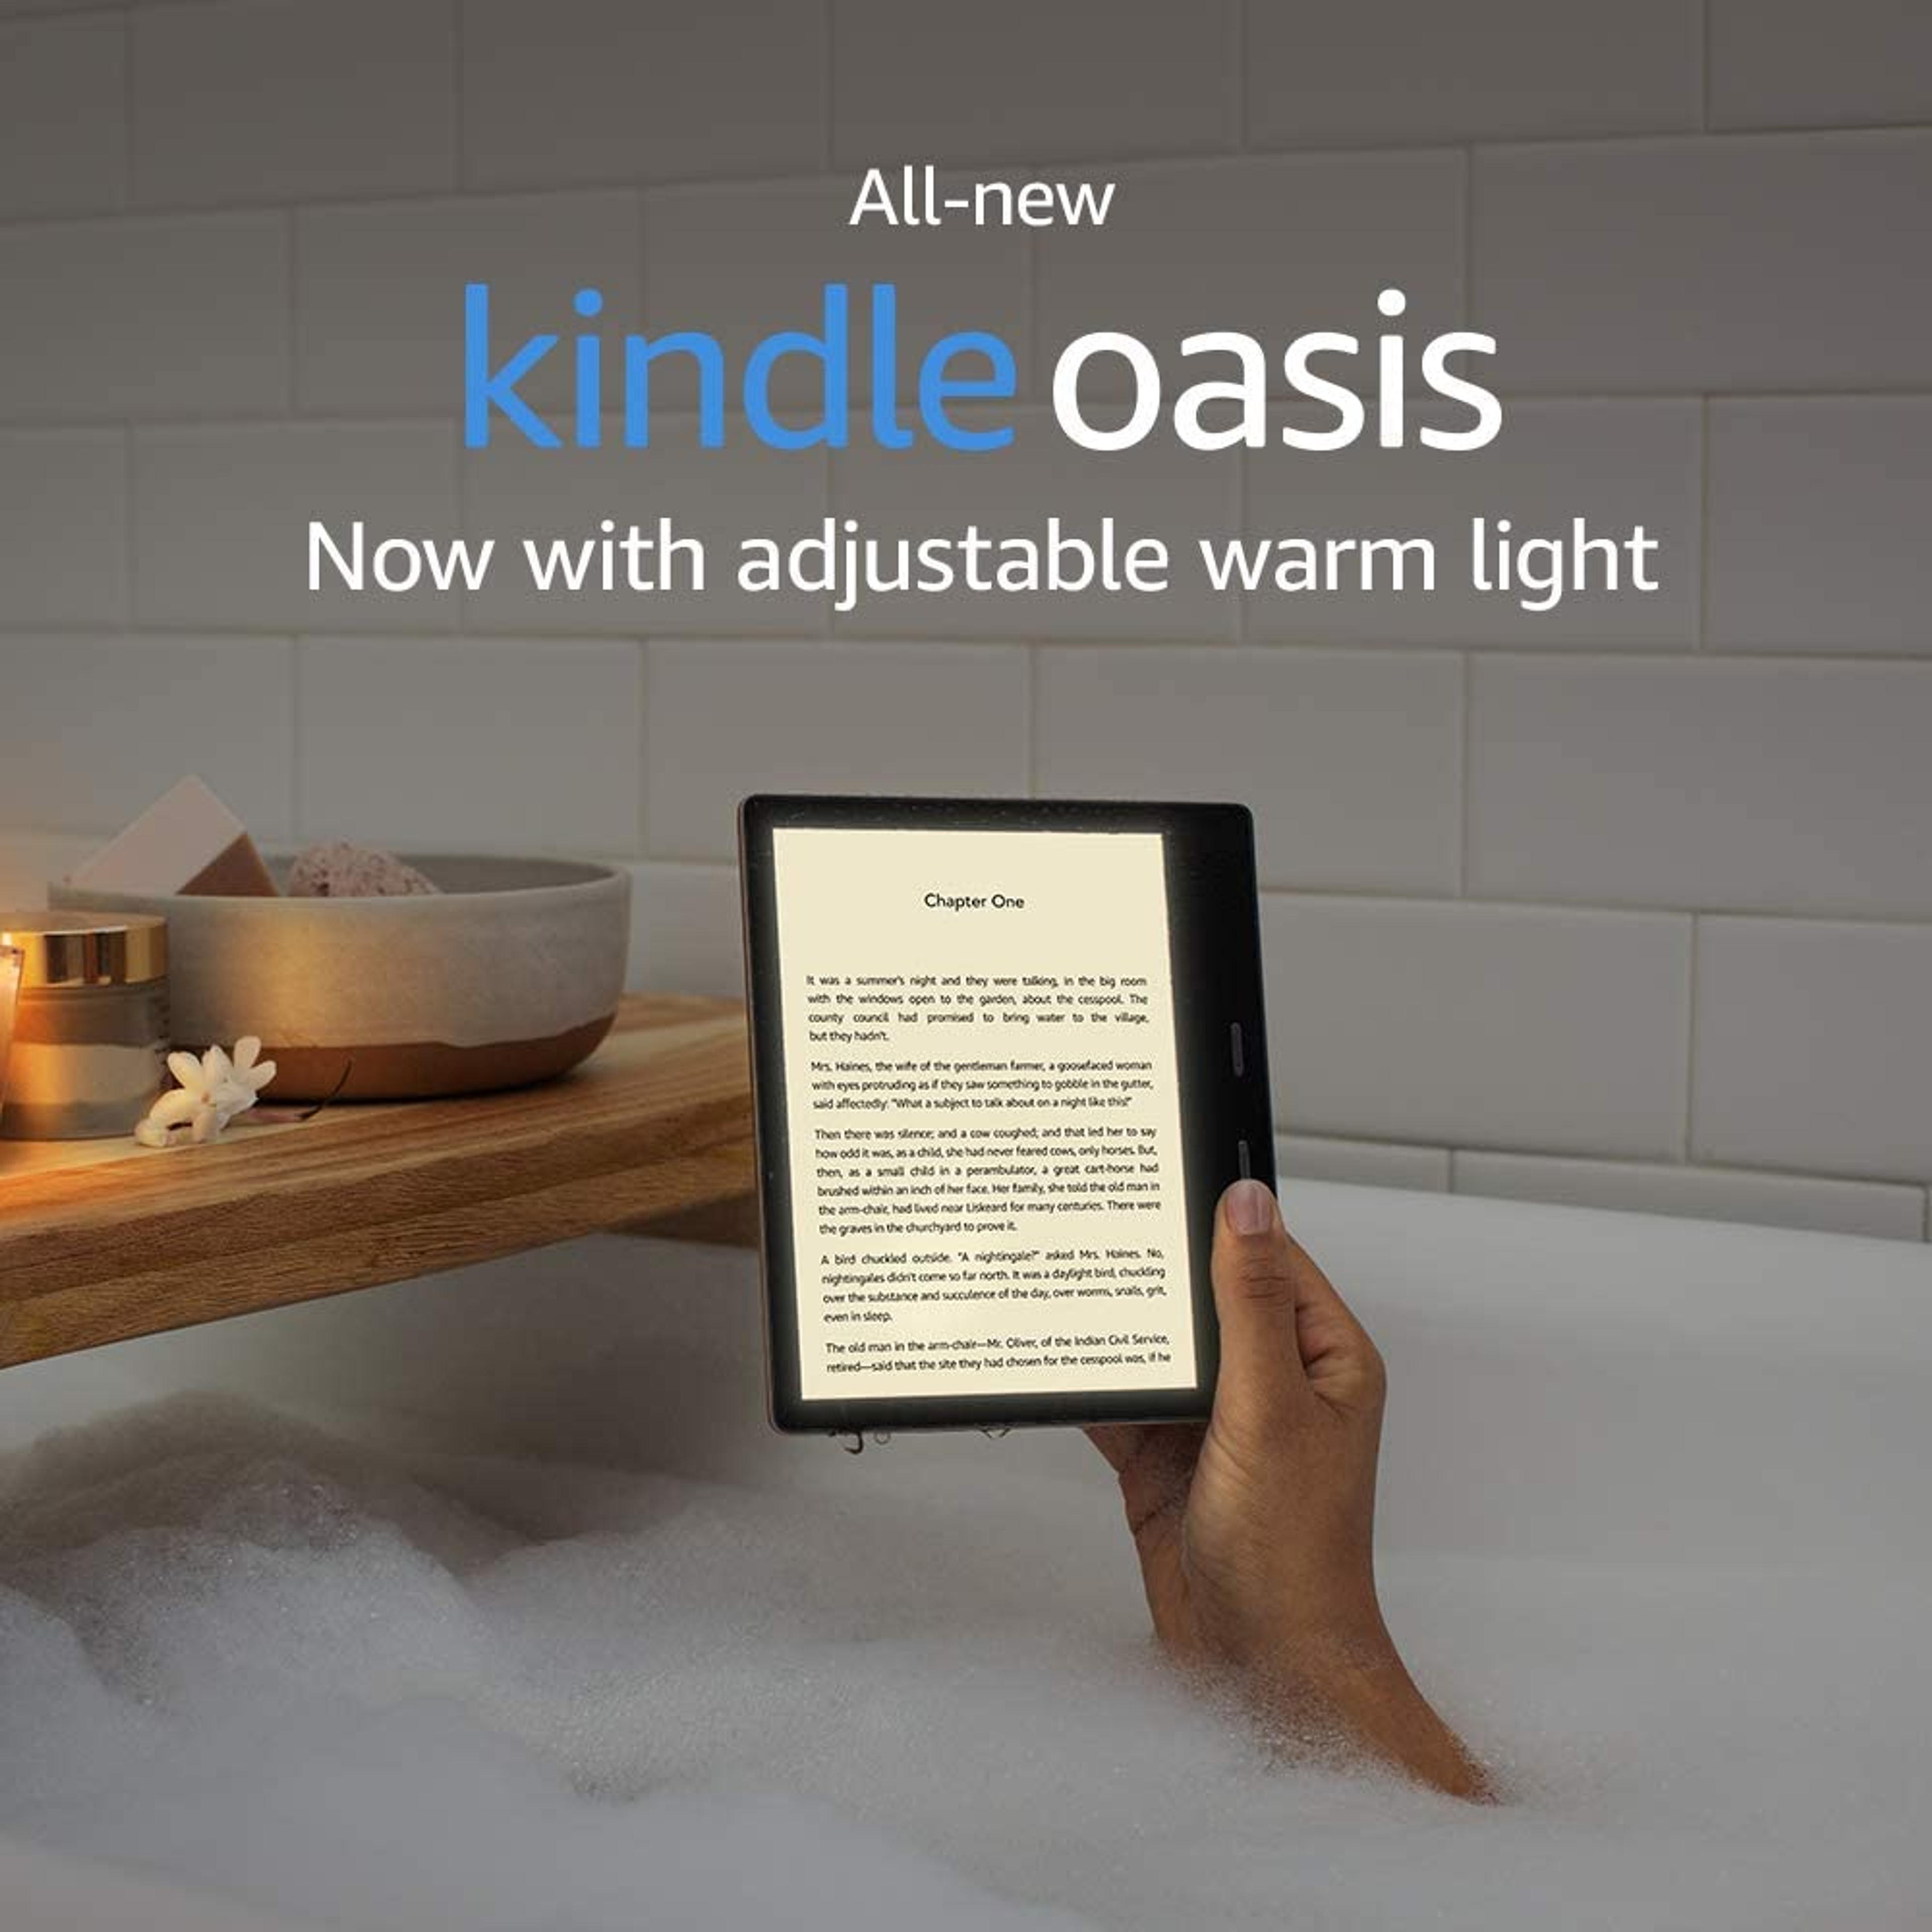 International Version – AT&T – Kindle Oasis - Now with adjustable warm light - 32 GB, Graphite - Free 4G LTE + Wi-Fi